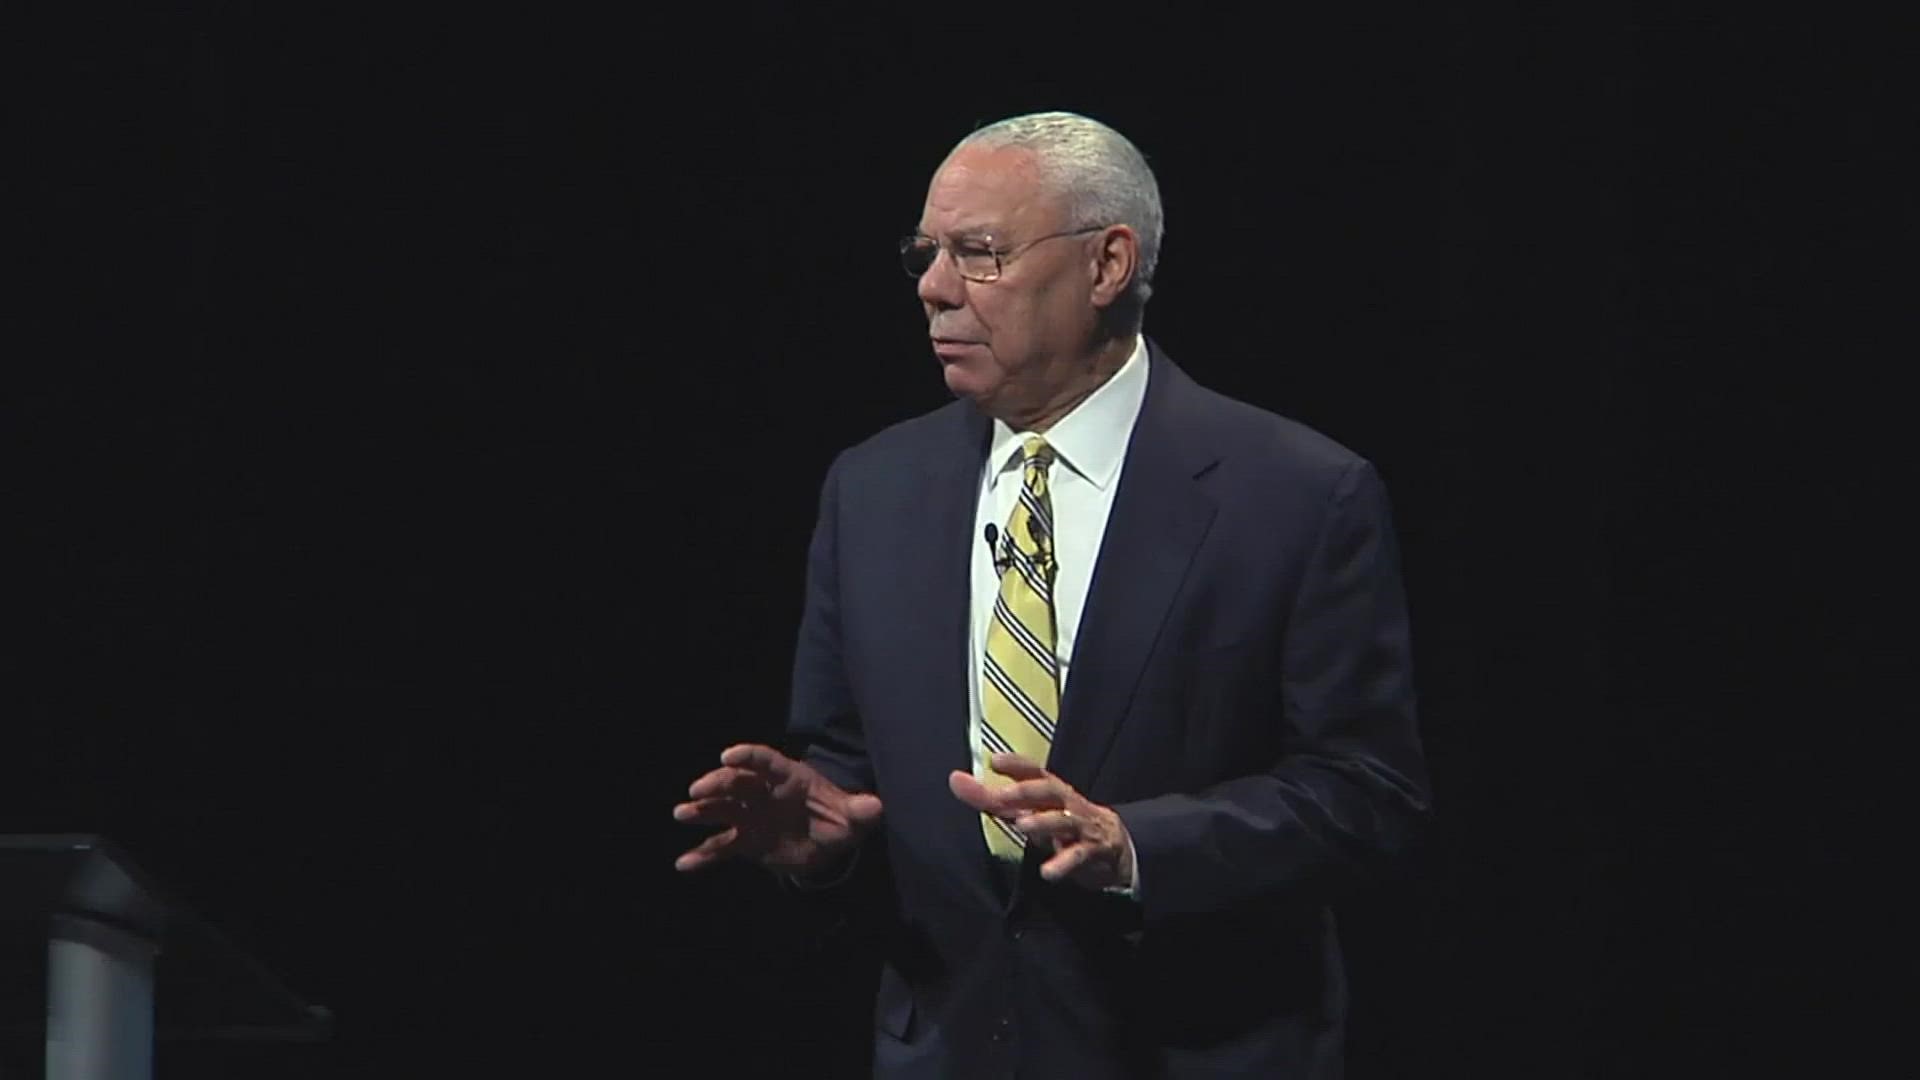 Archive video of a speech from Colin Powell at the Cleveland Foundation Centennial meeting on June 11, 2014. Video courtesy of Cleveland Foundation and YouTube.